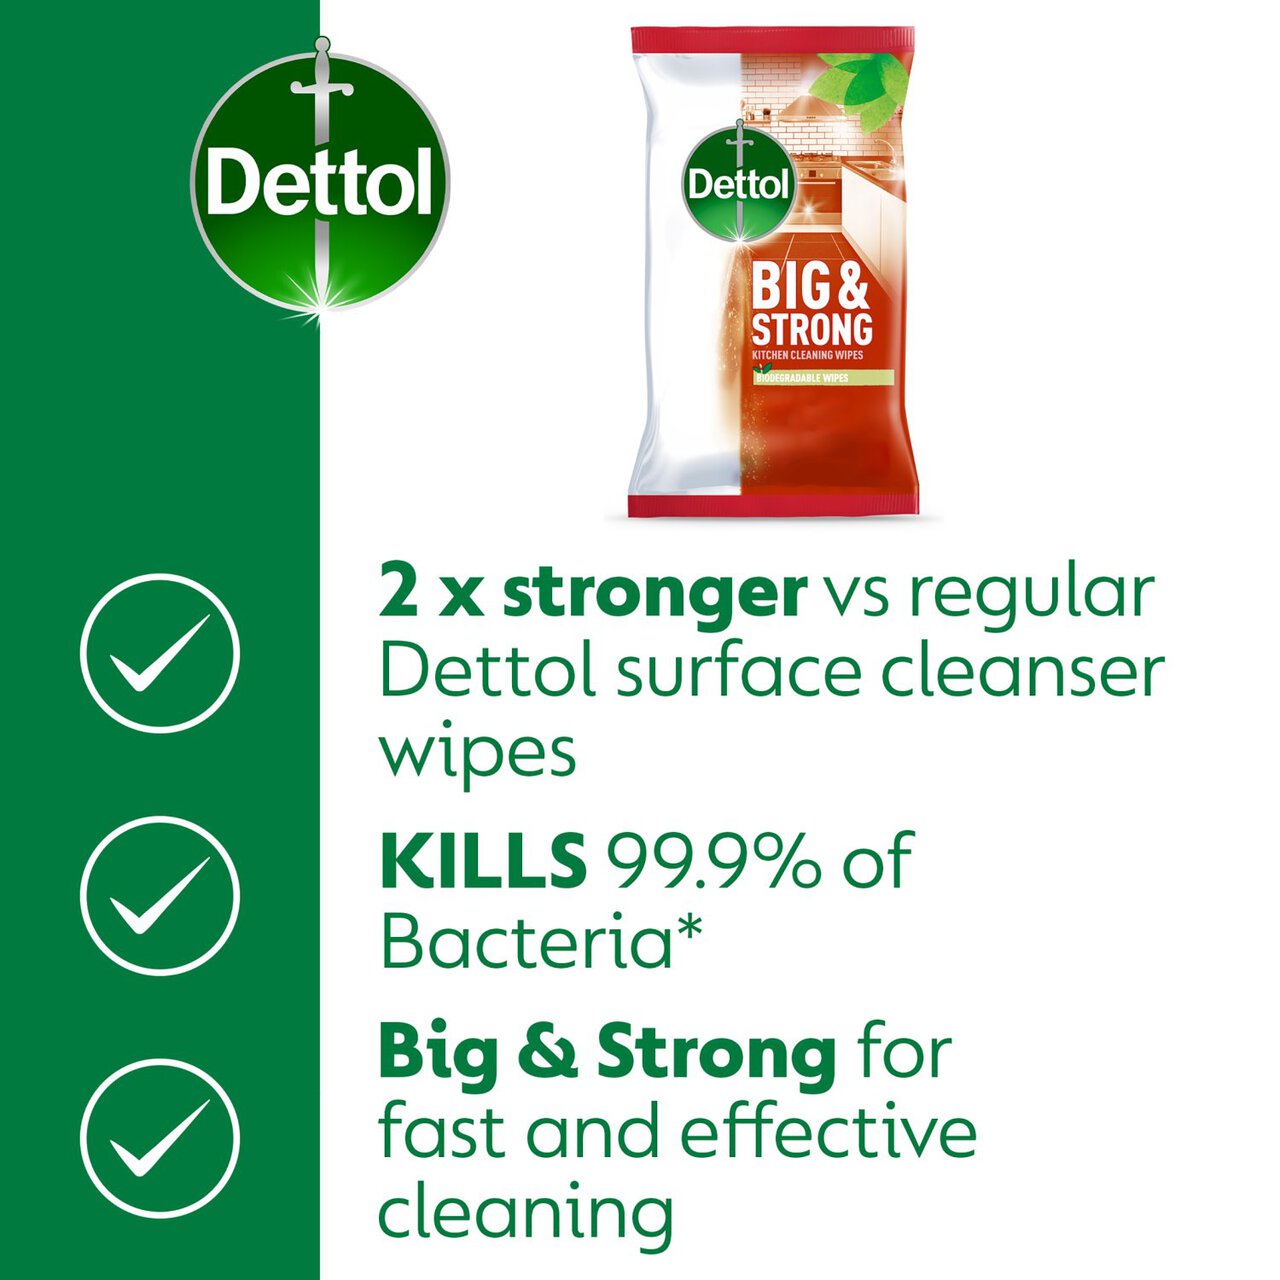 Dettol Big & Strong Kitchen Surface Cleaning Wipes 25 per pack